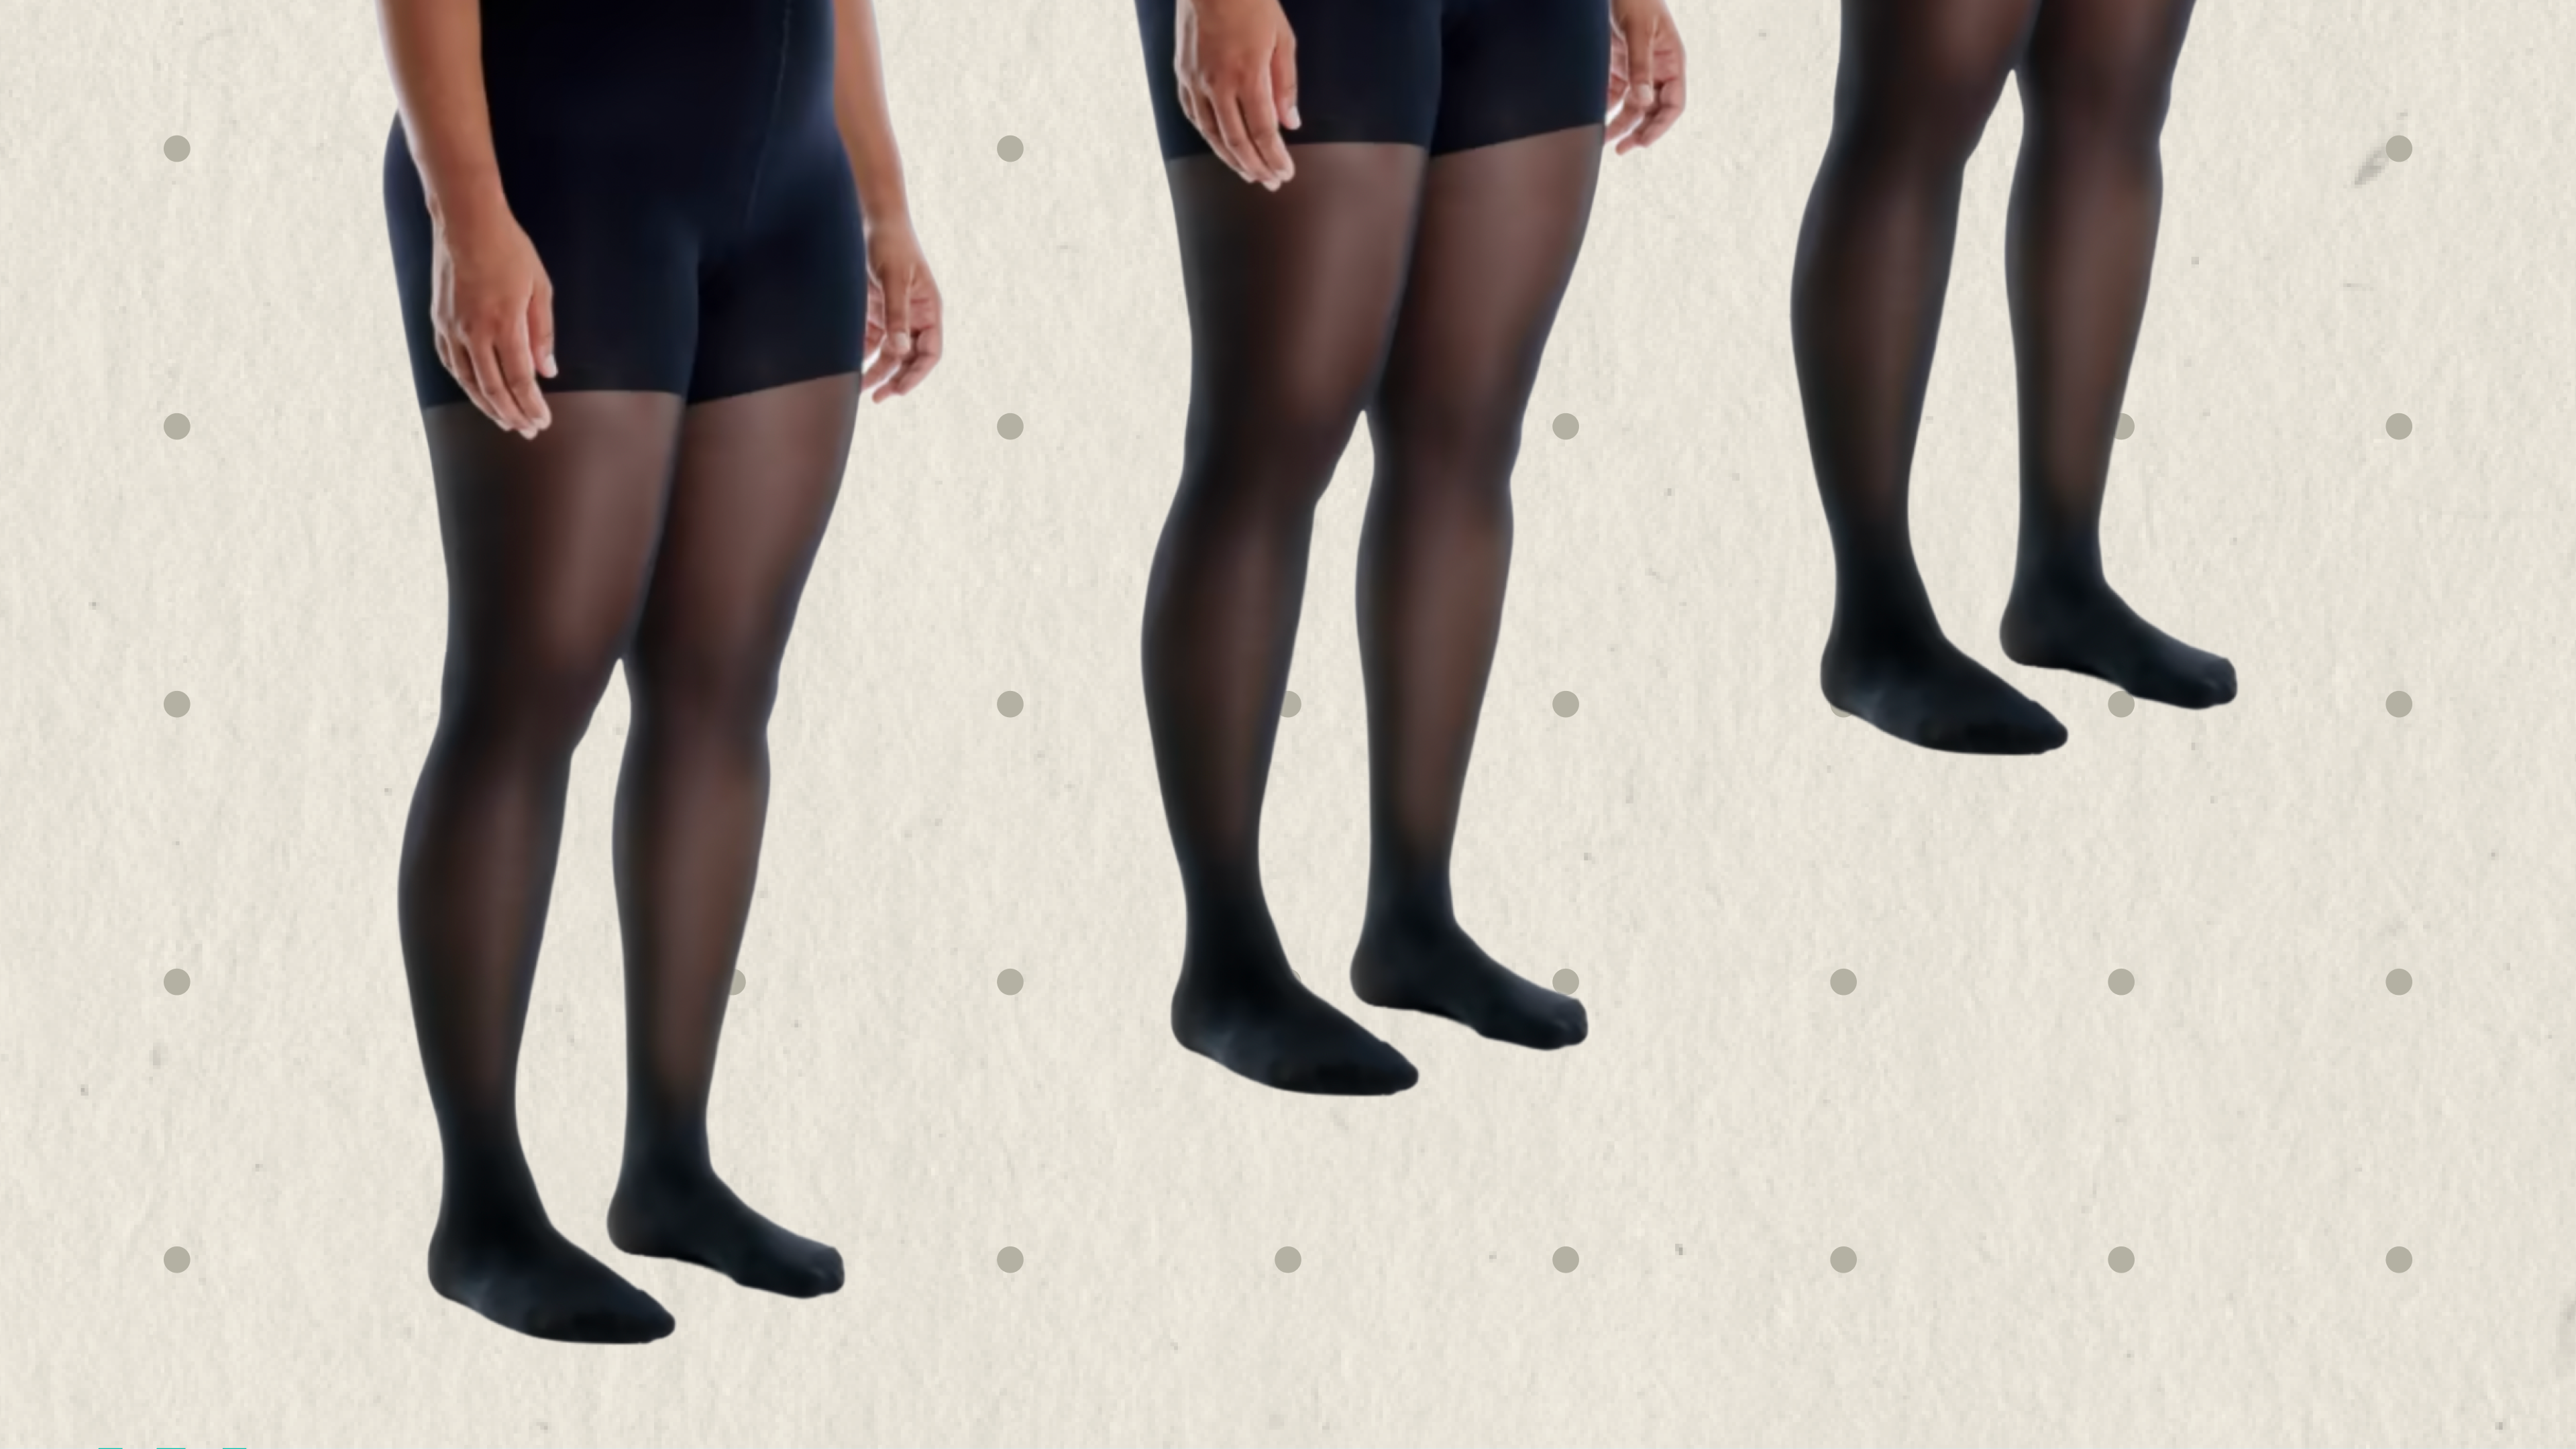 Sheertex Tights: Why These Perfect Stockings Are Worth It